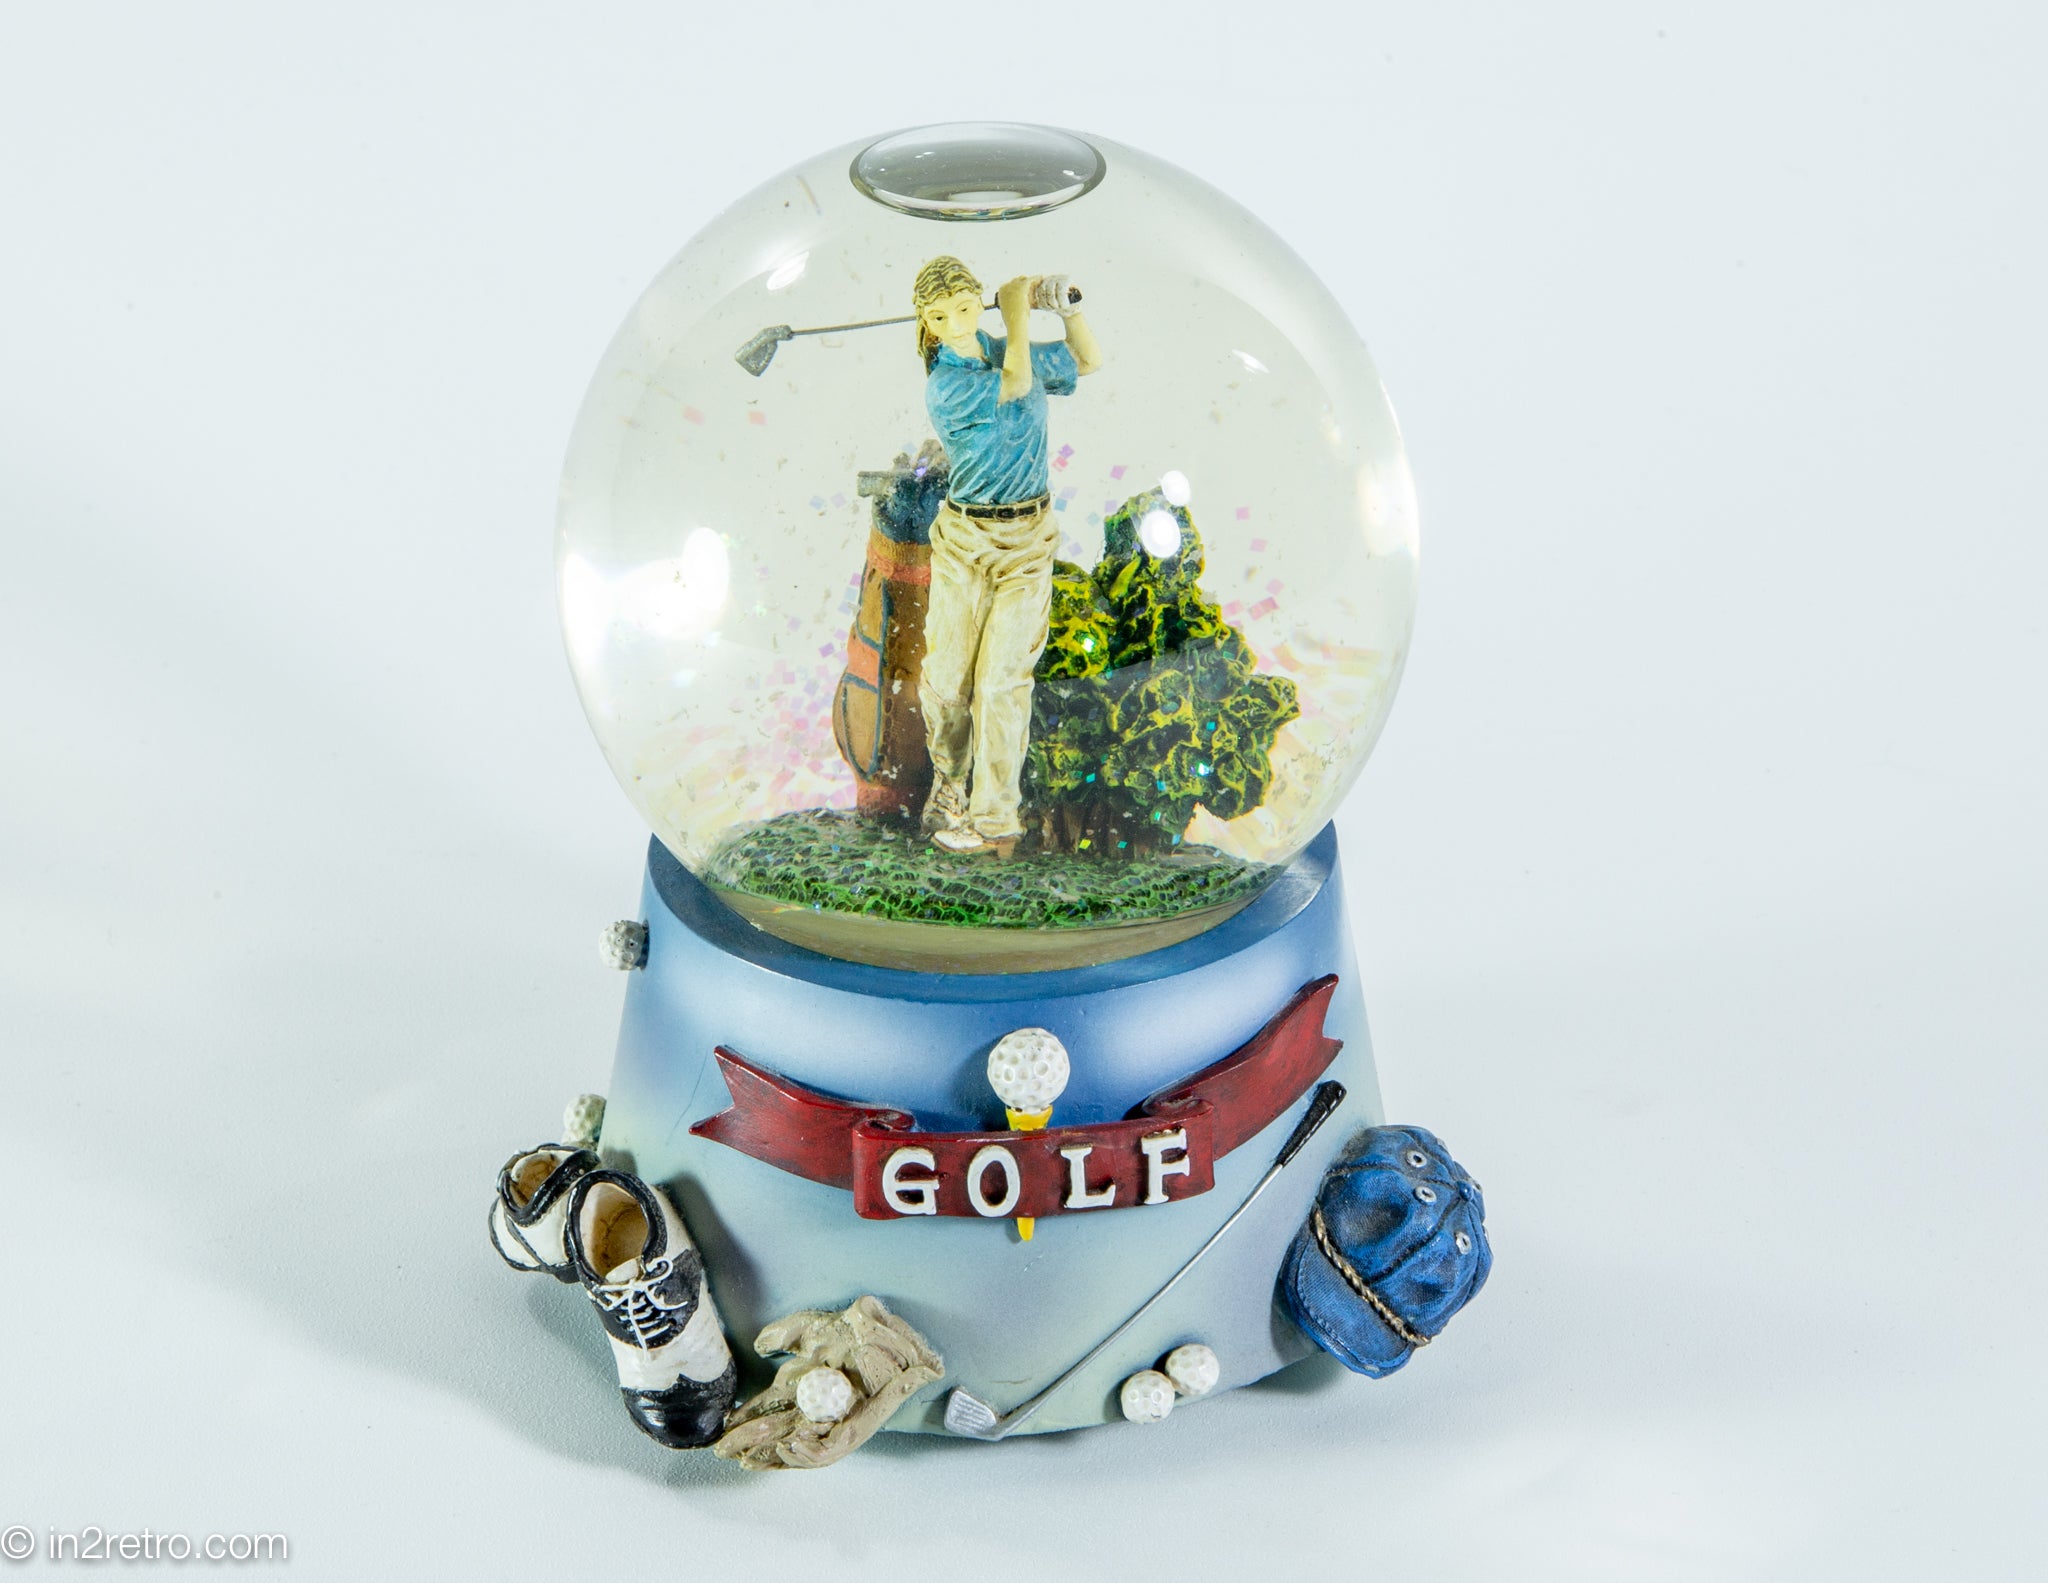 MUSICAL GOLF GLASS SNOW GLOBE OF LADY GOLFER WATER FILLED COLORFUL SPARKLES  PLAYS 'TOP OF THE WORLD